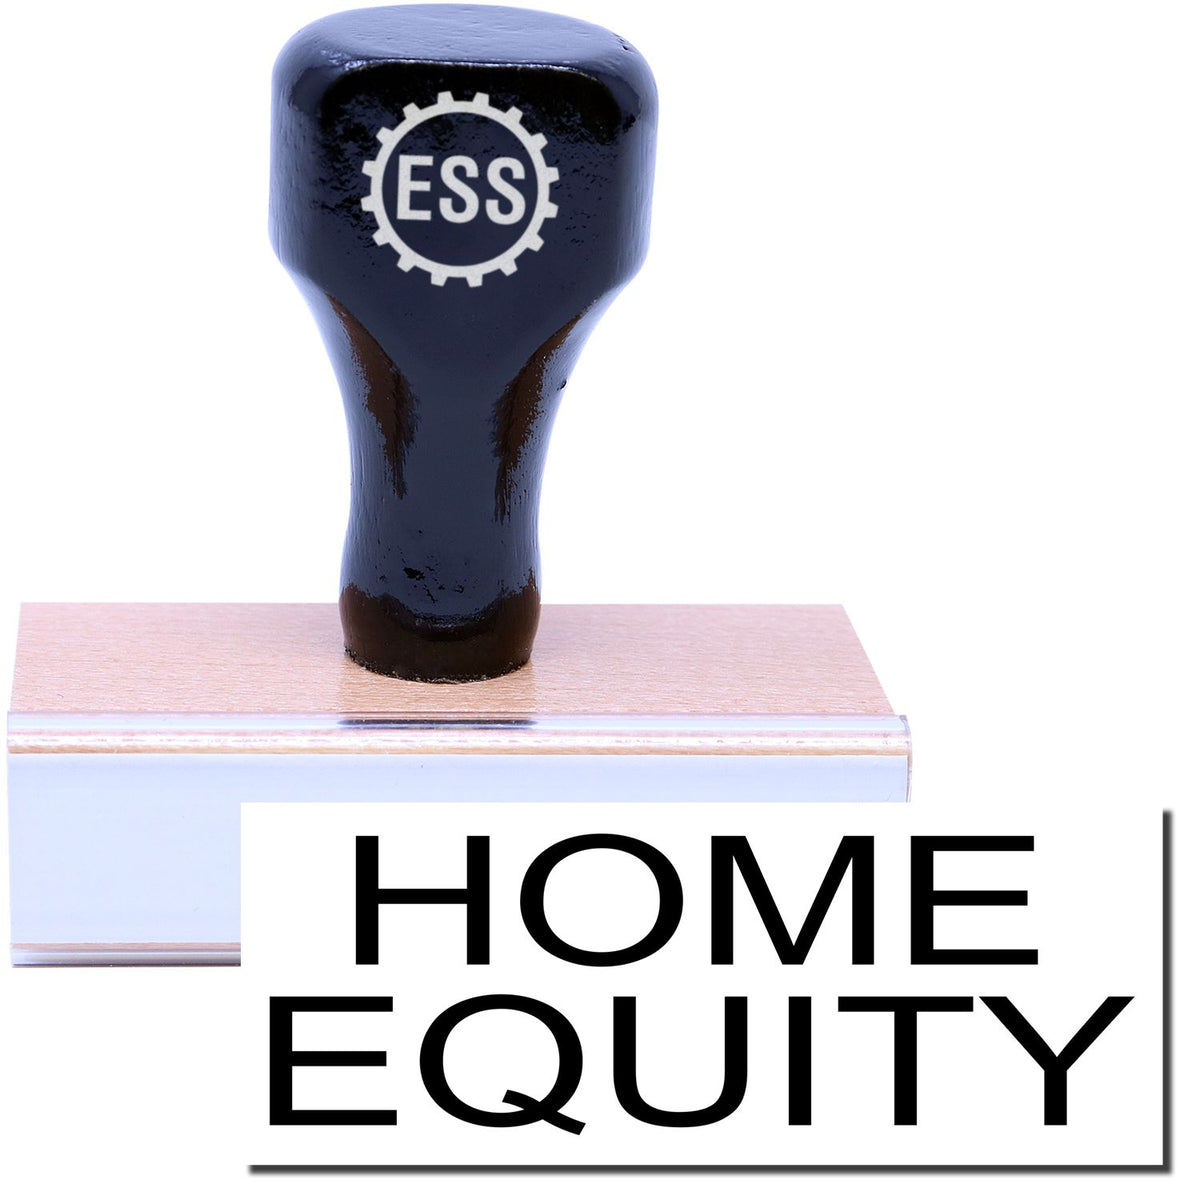 A stock office rubber stamp with a stamped image showing how the text &quot;HOME EQUITY&quot; is displayed after stamping.